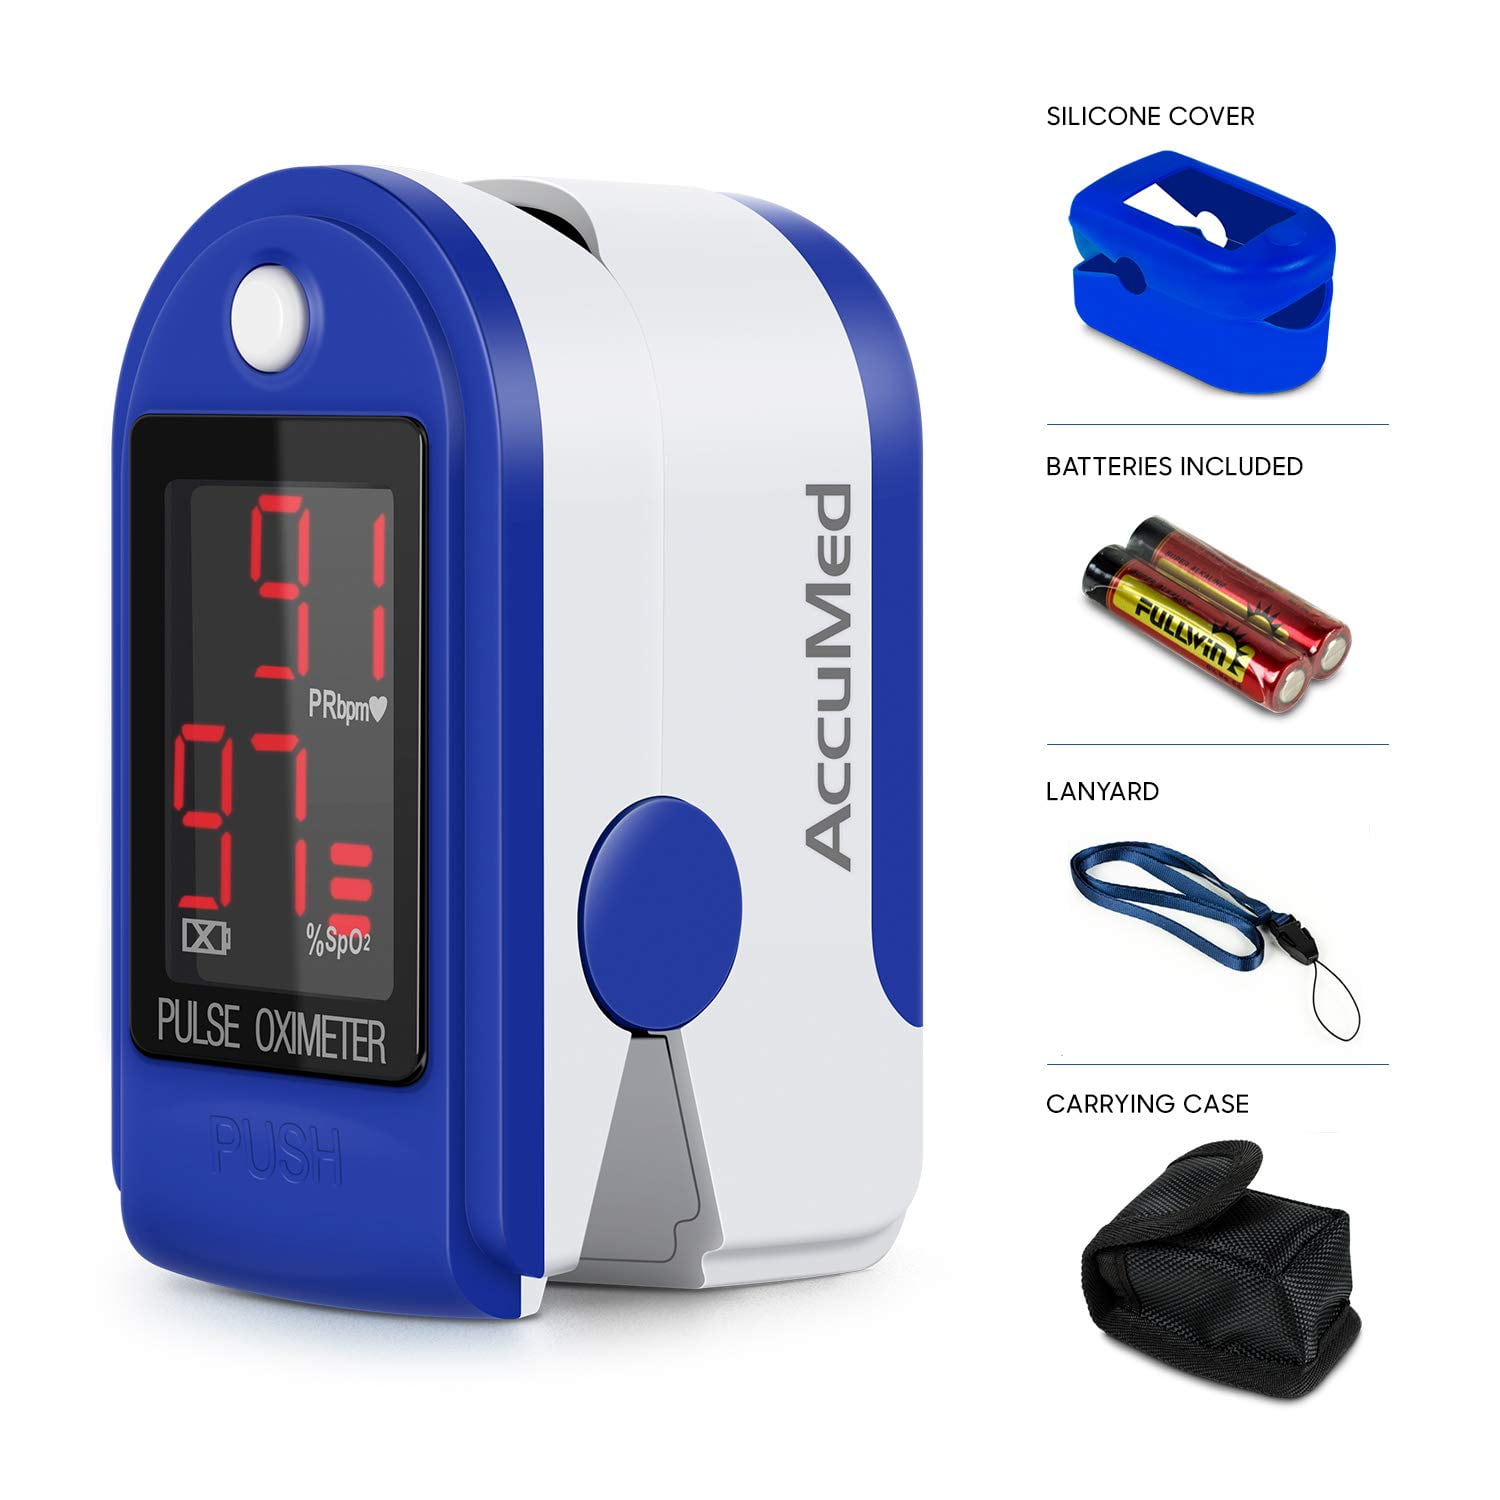 Top #10 Best Pulse Oximeter For Medical Use Fda Approved in 2021